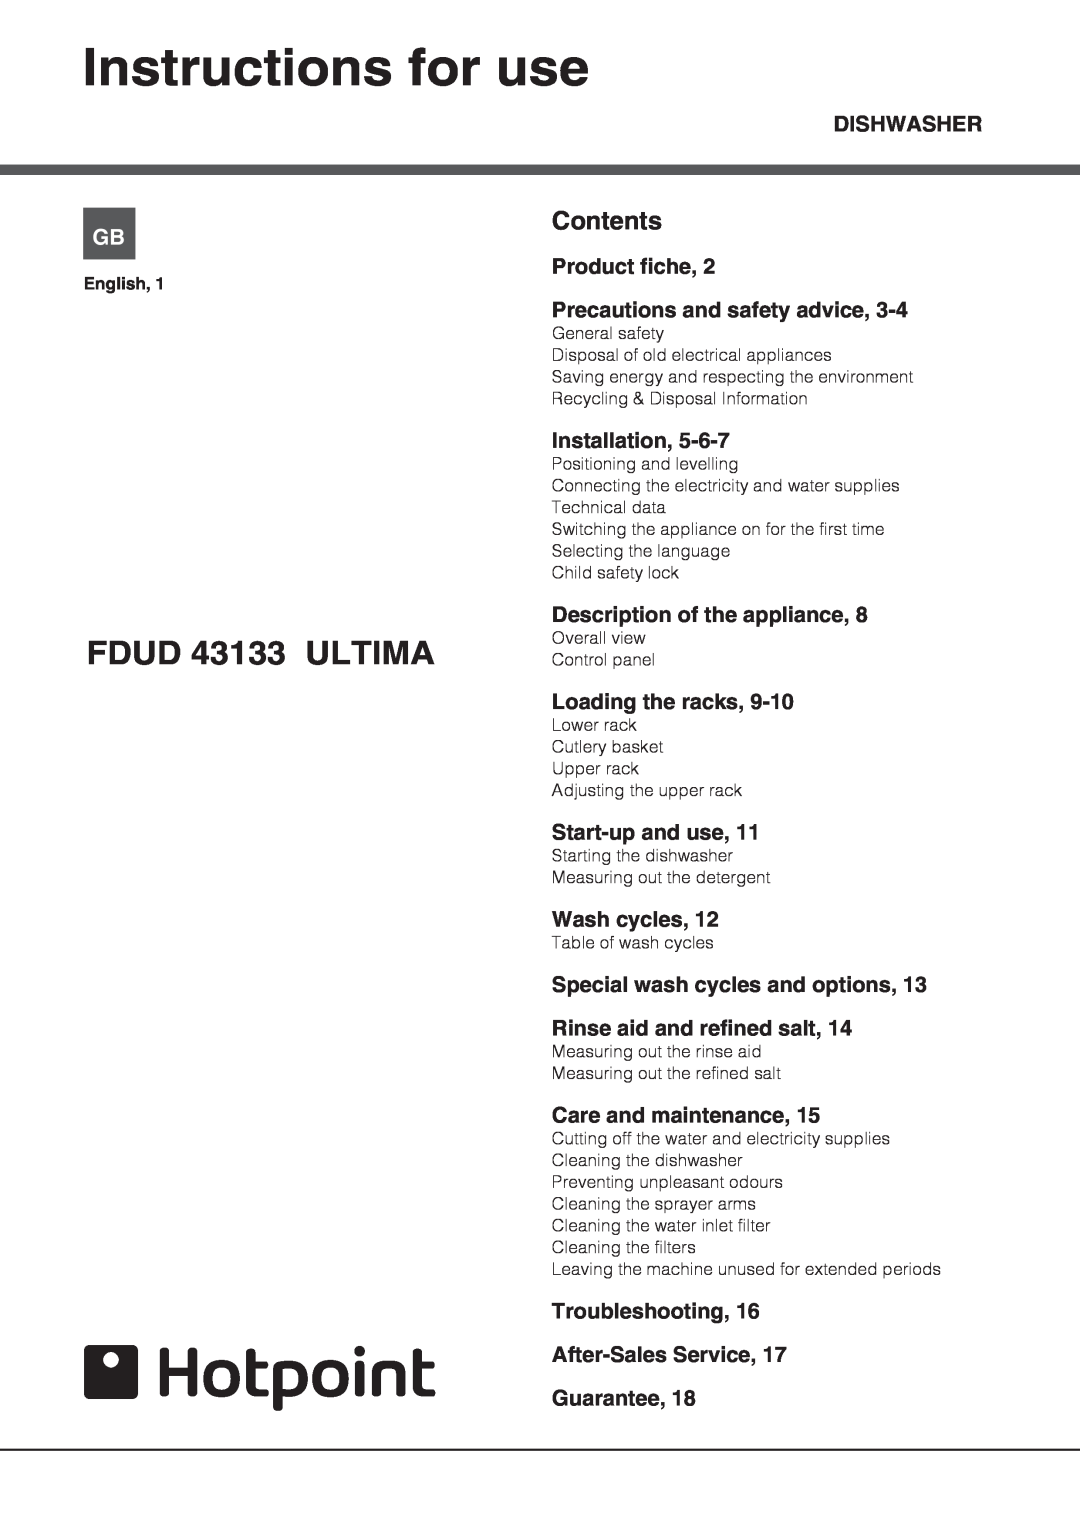 Hotpoint FDUD 43133 Ultima manual Instructions for use, FDUD 43133 ULTIMA, Contents 